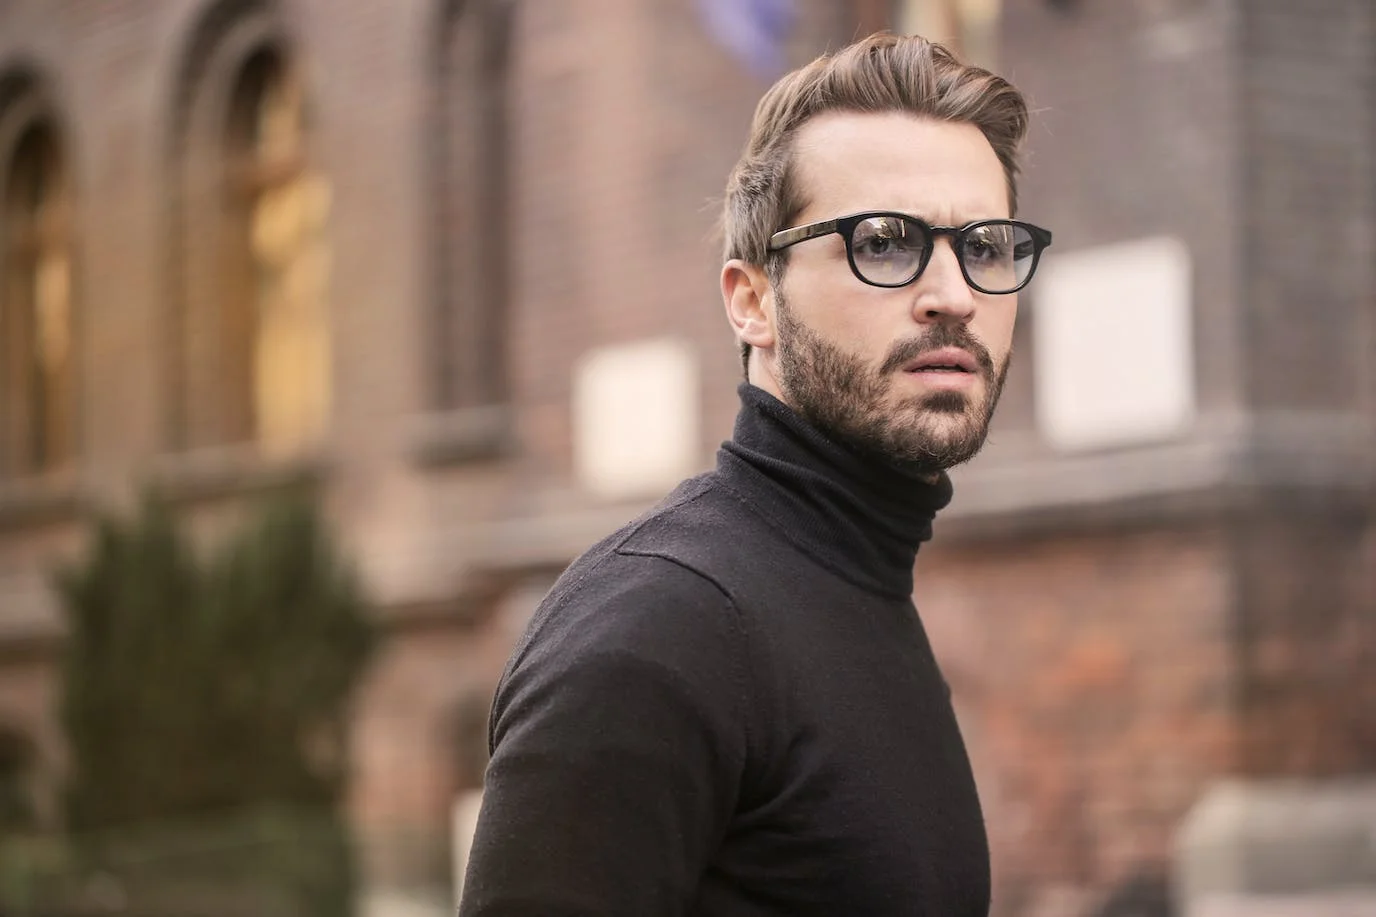 Man photo : a standing man wearing a turtleneck sweater and glasses, with a three-day beard, behind which we see a university. Outdoor photograph in daylight, blurred background.